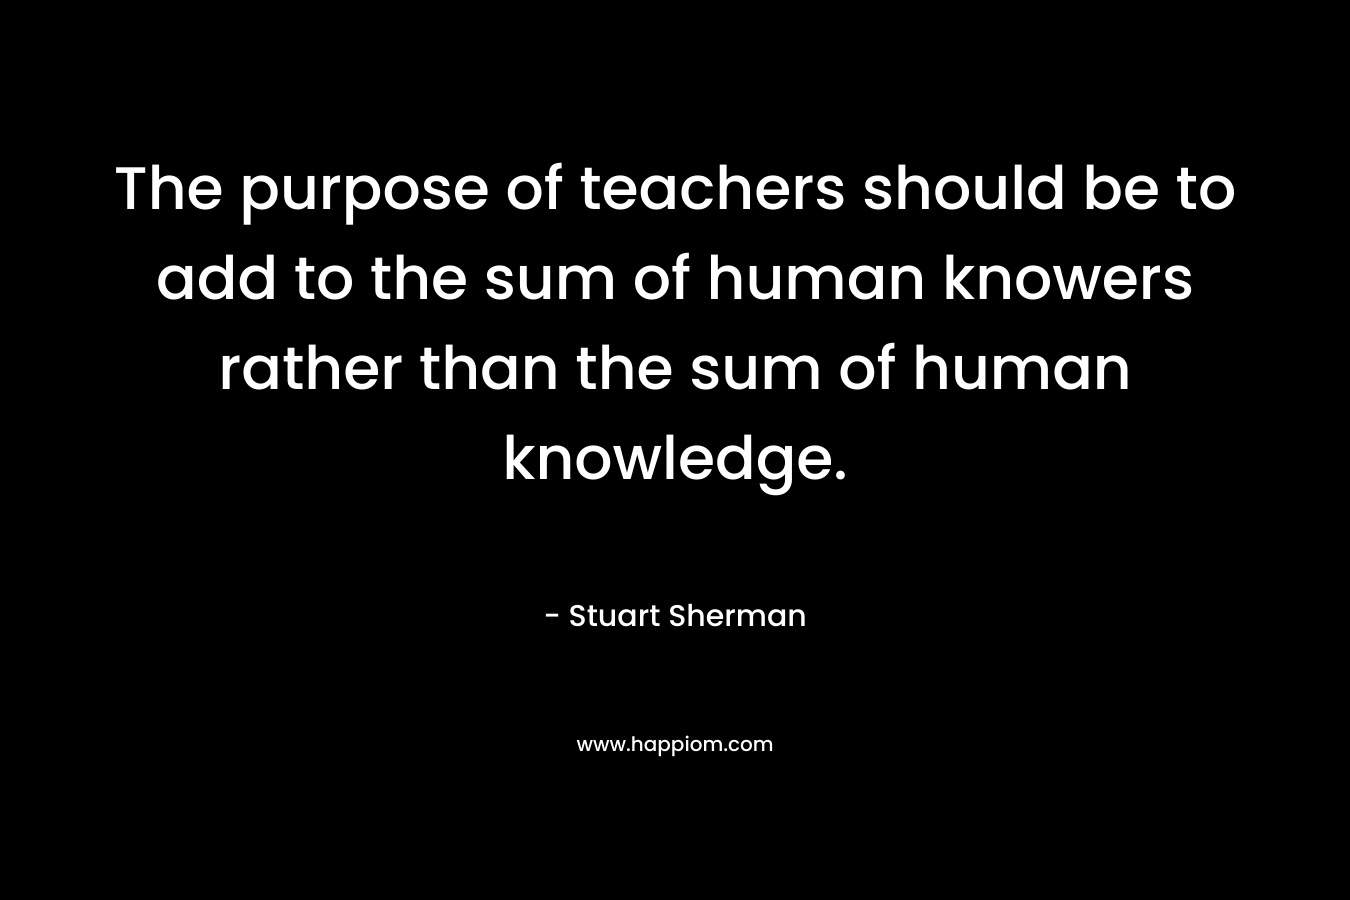 The purpose of teachers should be to add to the sum of human knowers rather than the sum of human knowledge.